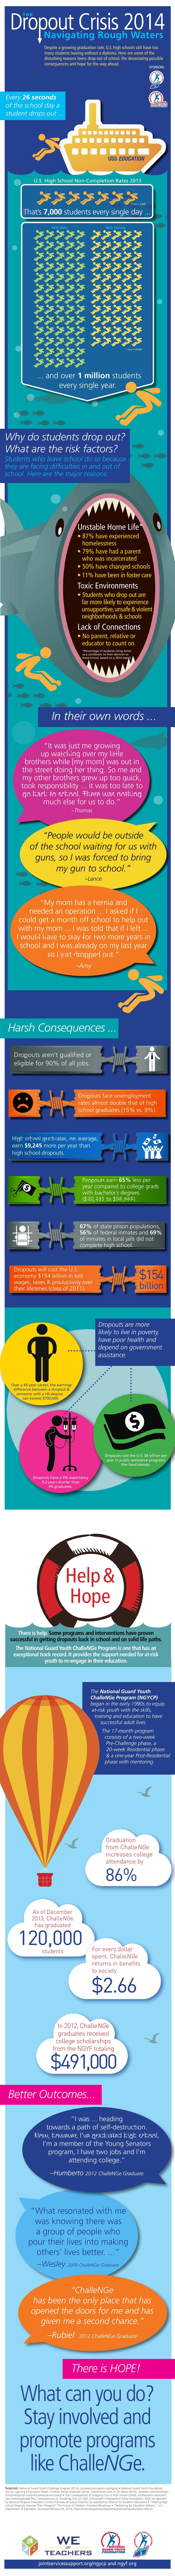 2014 Dropout Crisis by the Numbers Infographic